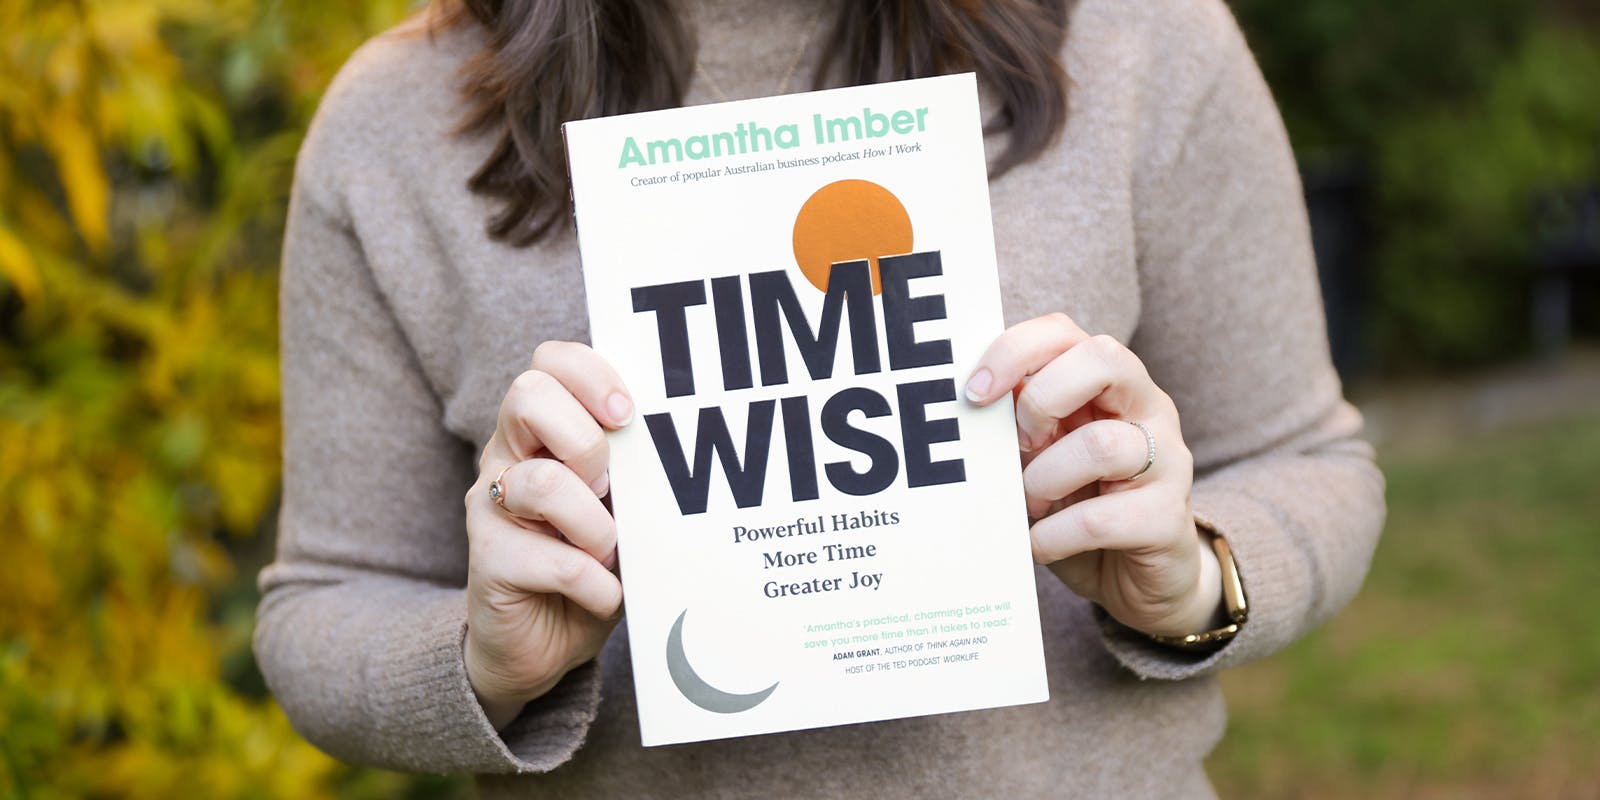 Time Wise shares 5 secrets of highly-effective people